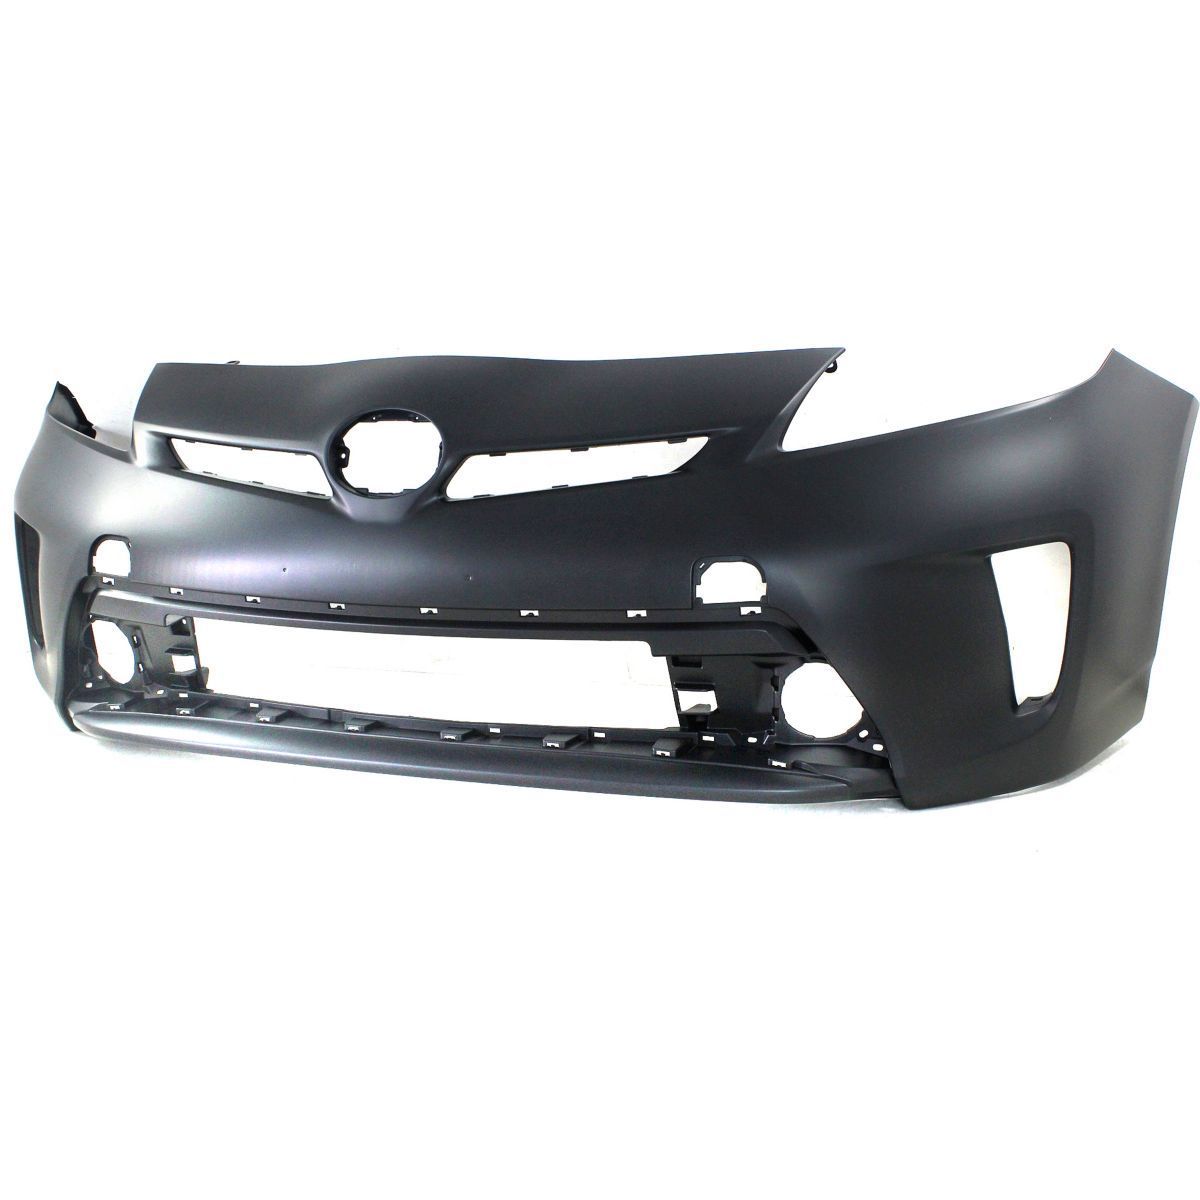 Toyota Prius 2012 - 2015 Front Bumper Cover 12 - 15 TO1000394 Bumper-King